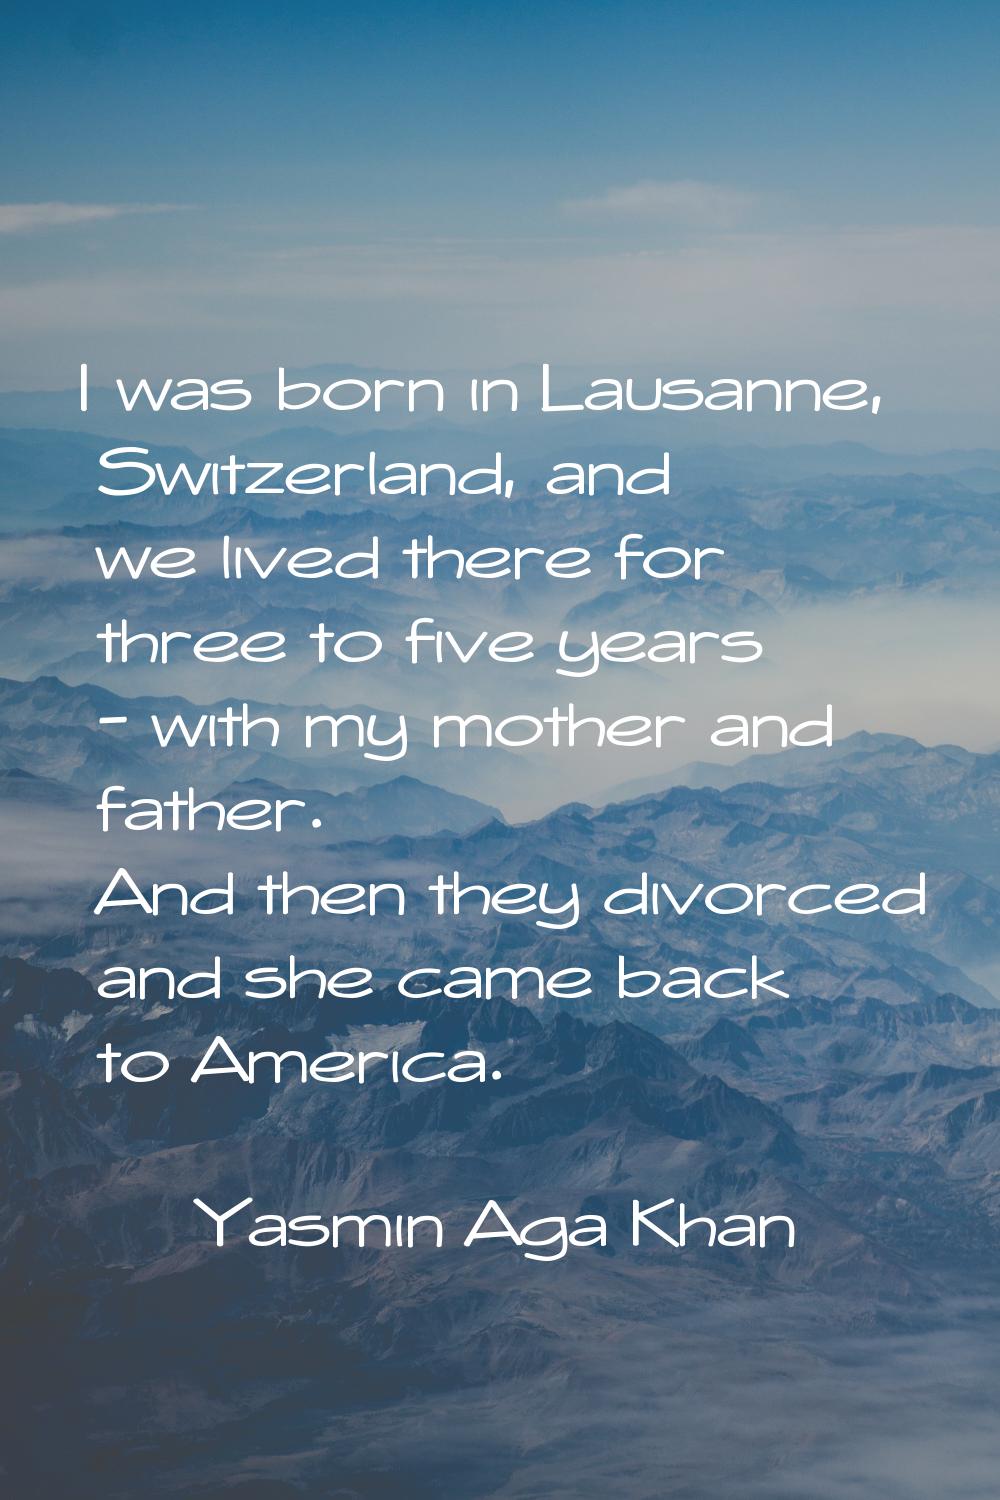 I was born in Lausanne, Switzerland, and we lived there for three to five years - with my mother an